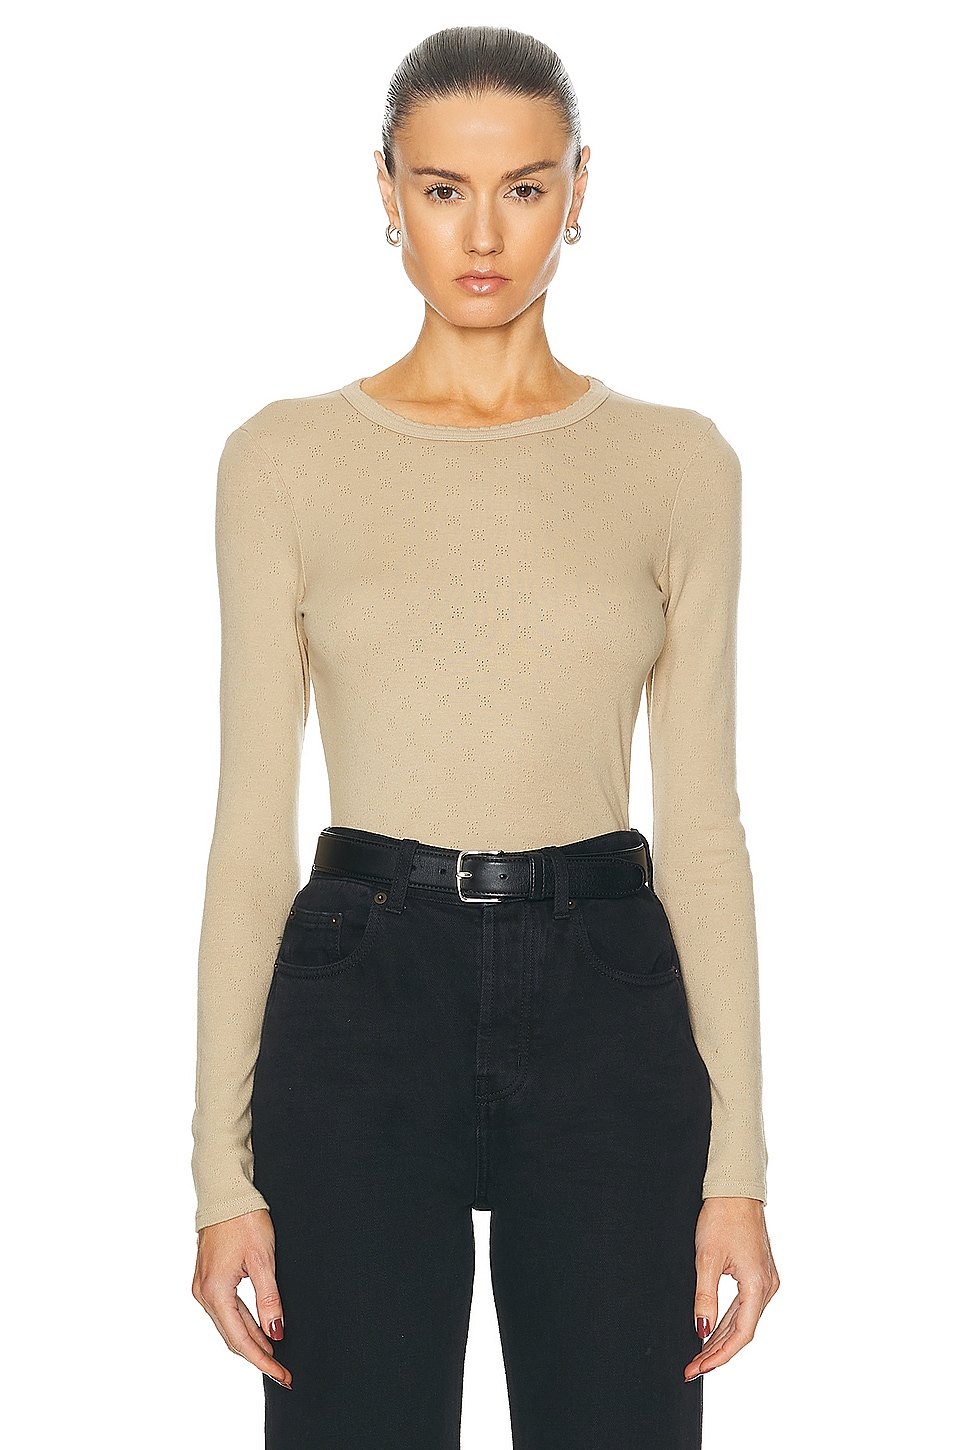 Image 1 of Enza Costa Scallop Edge Pointelle Long Sleeve Crew Top in Tan